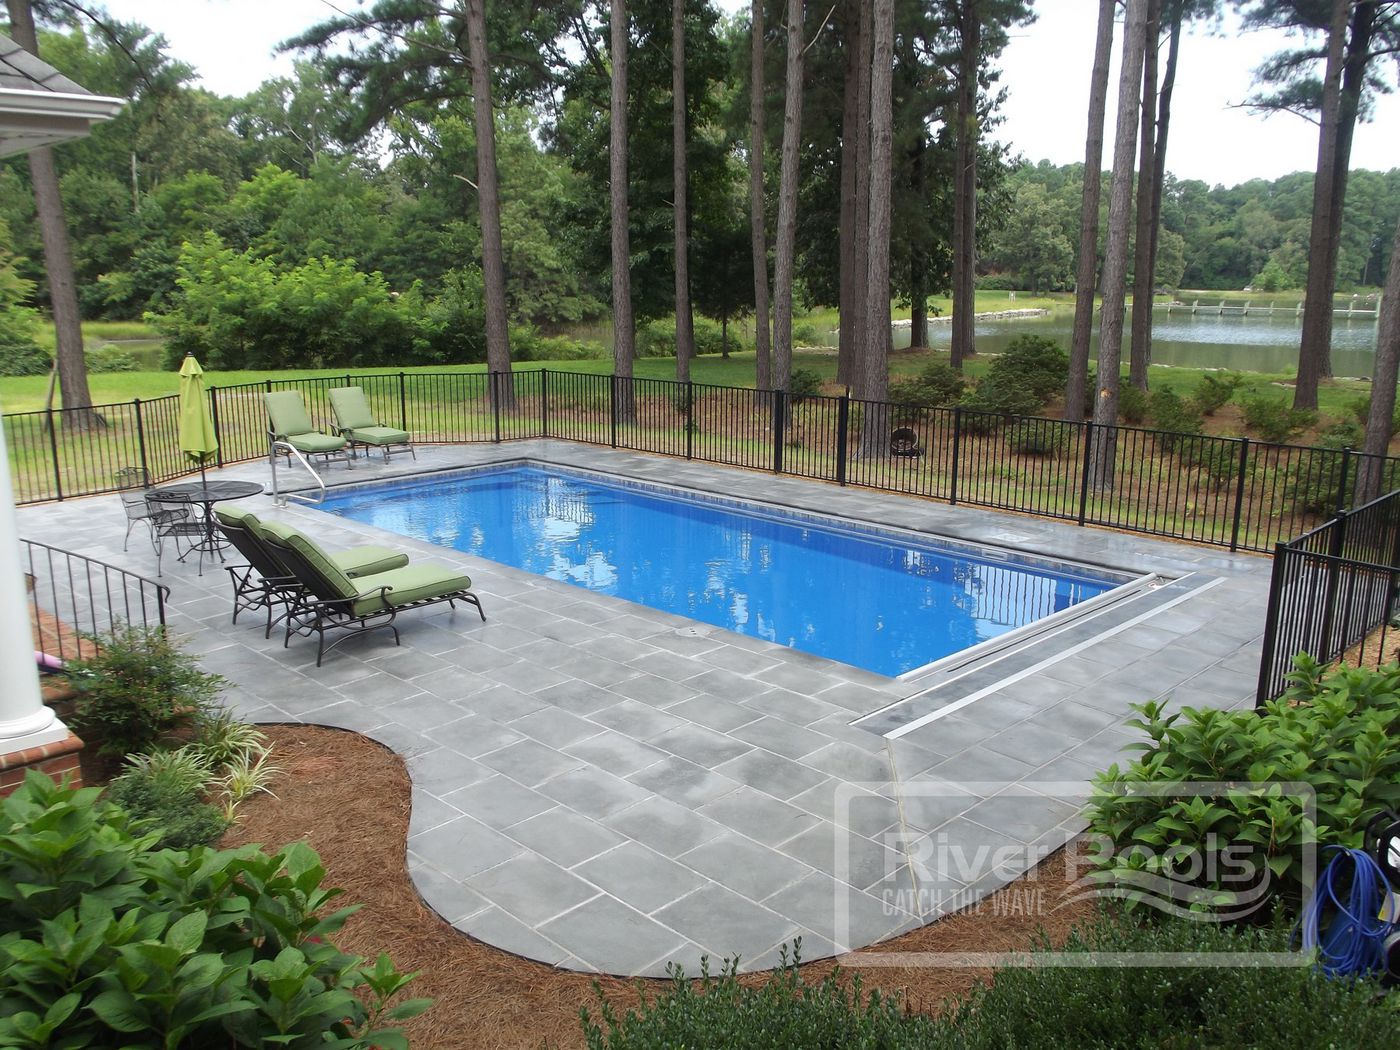 What Is The Best Small Pool Design For A Small Yard